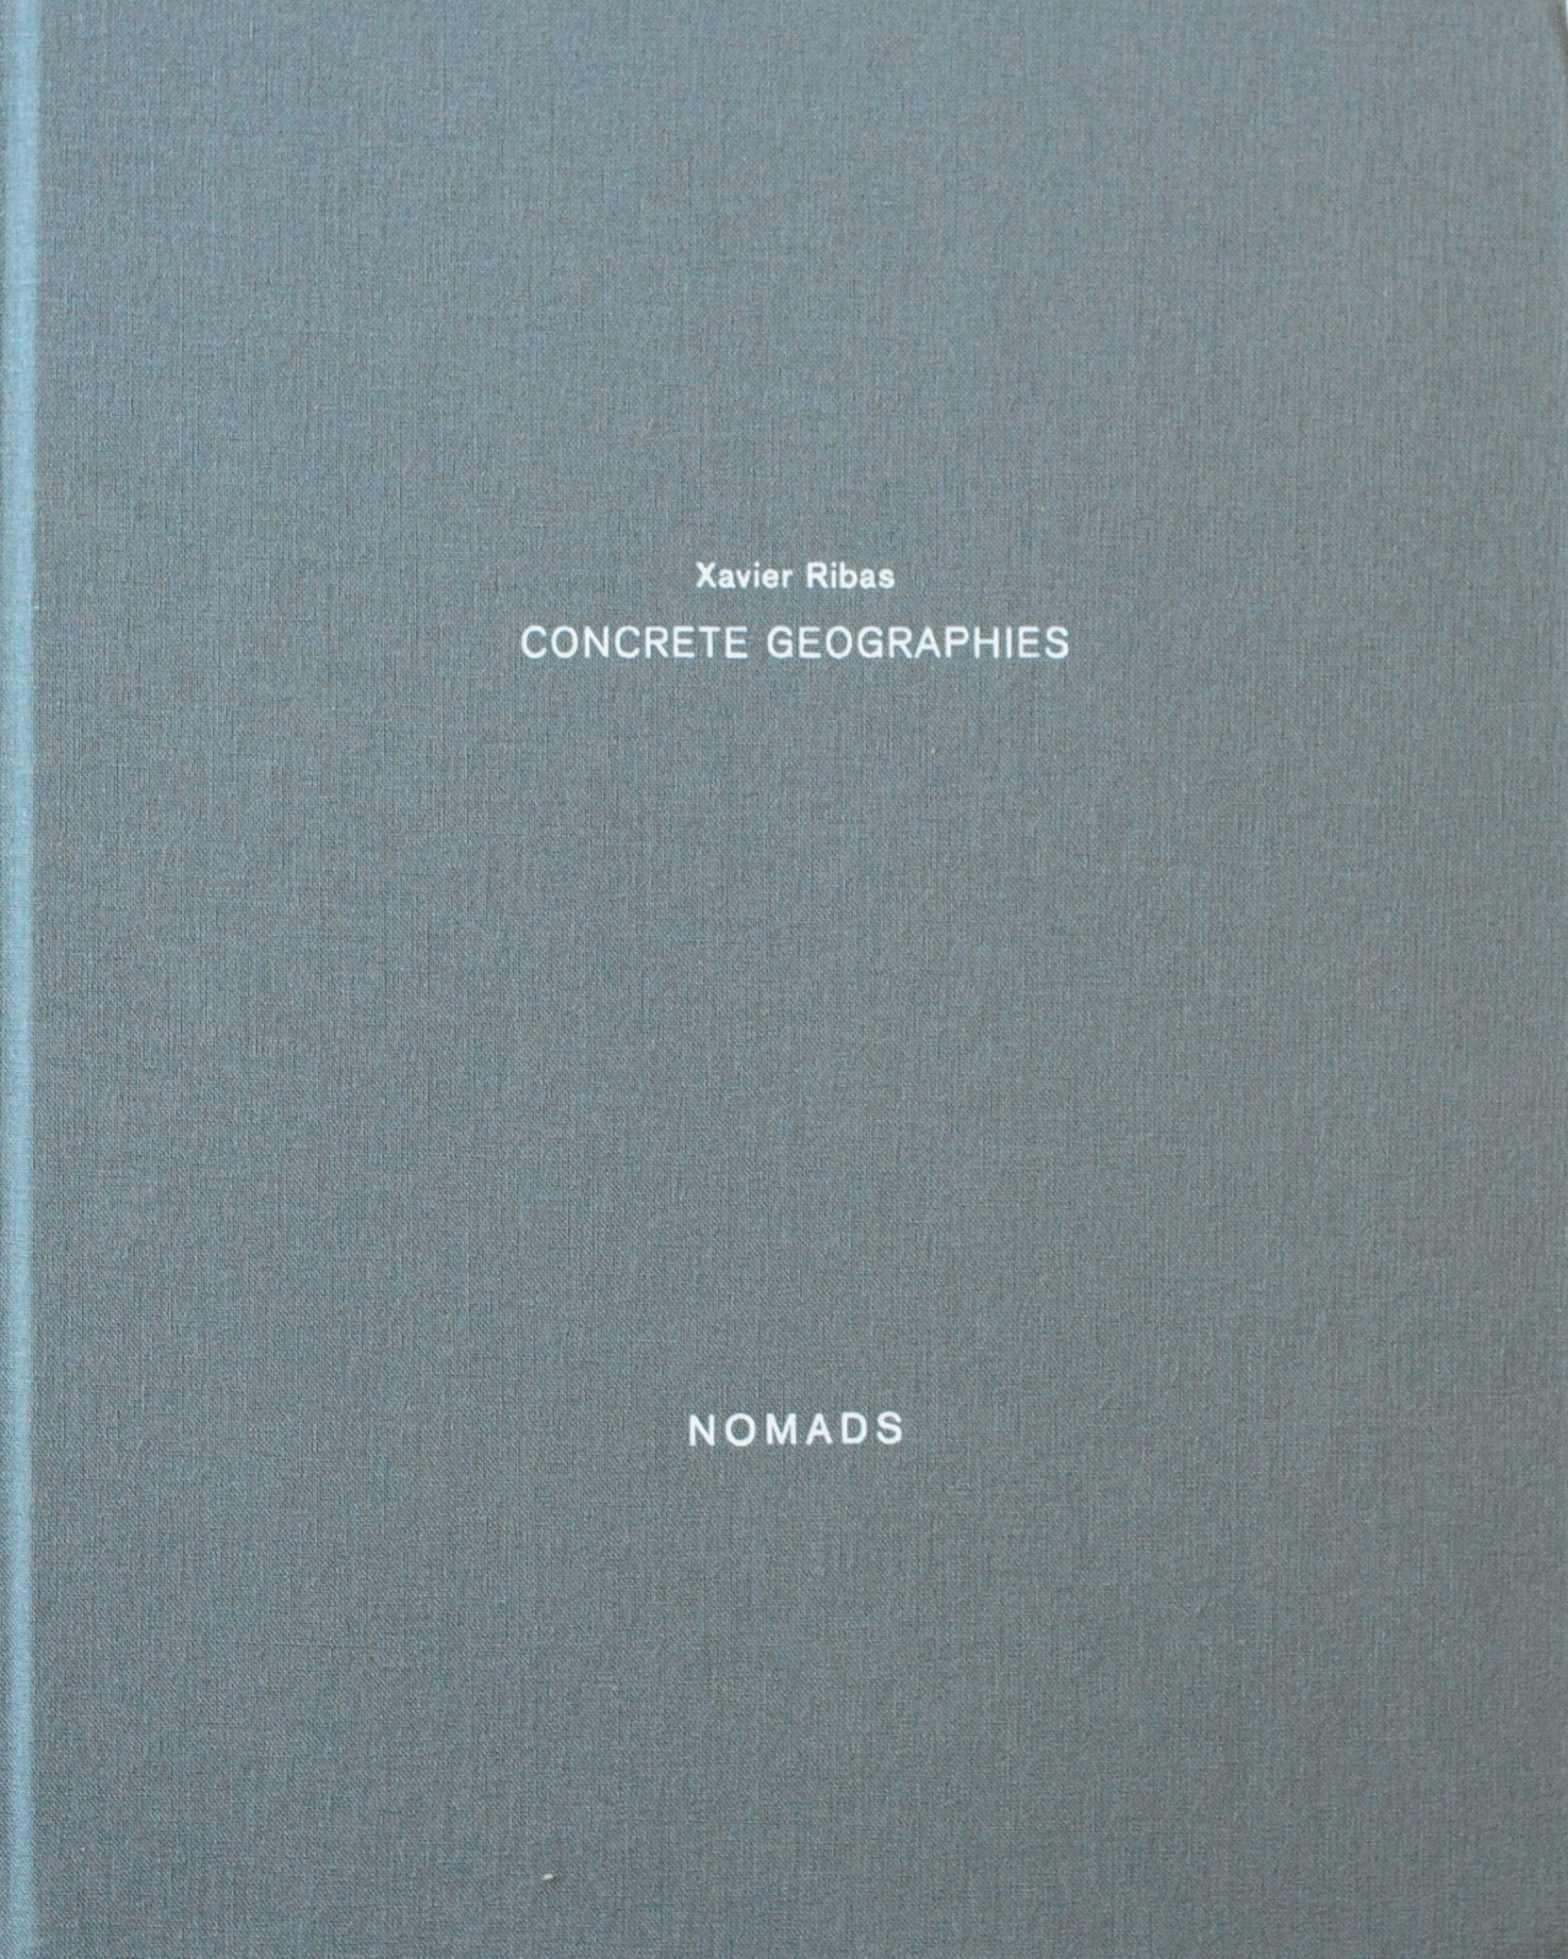 Concrete Geographies (Nomads) Xavier Ribas